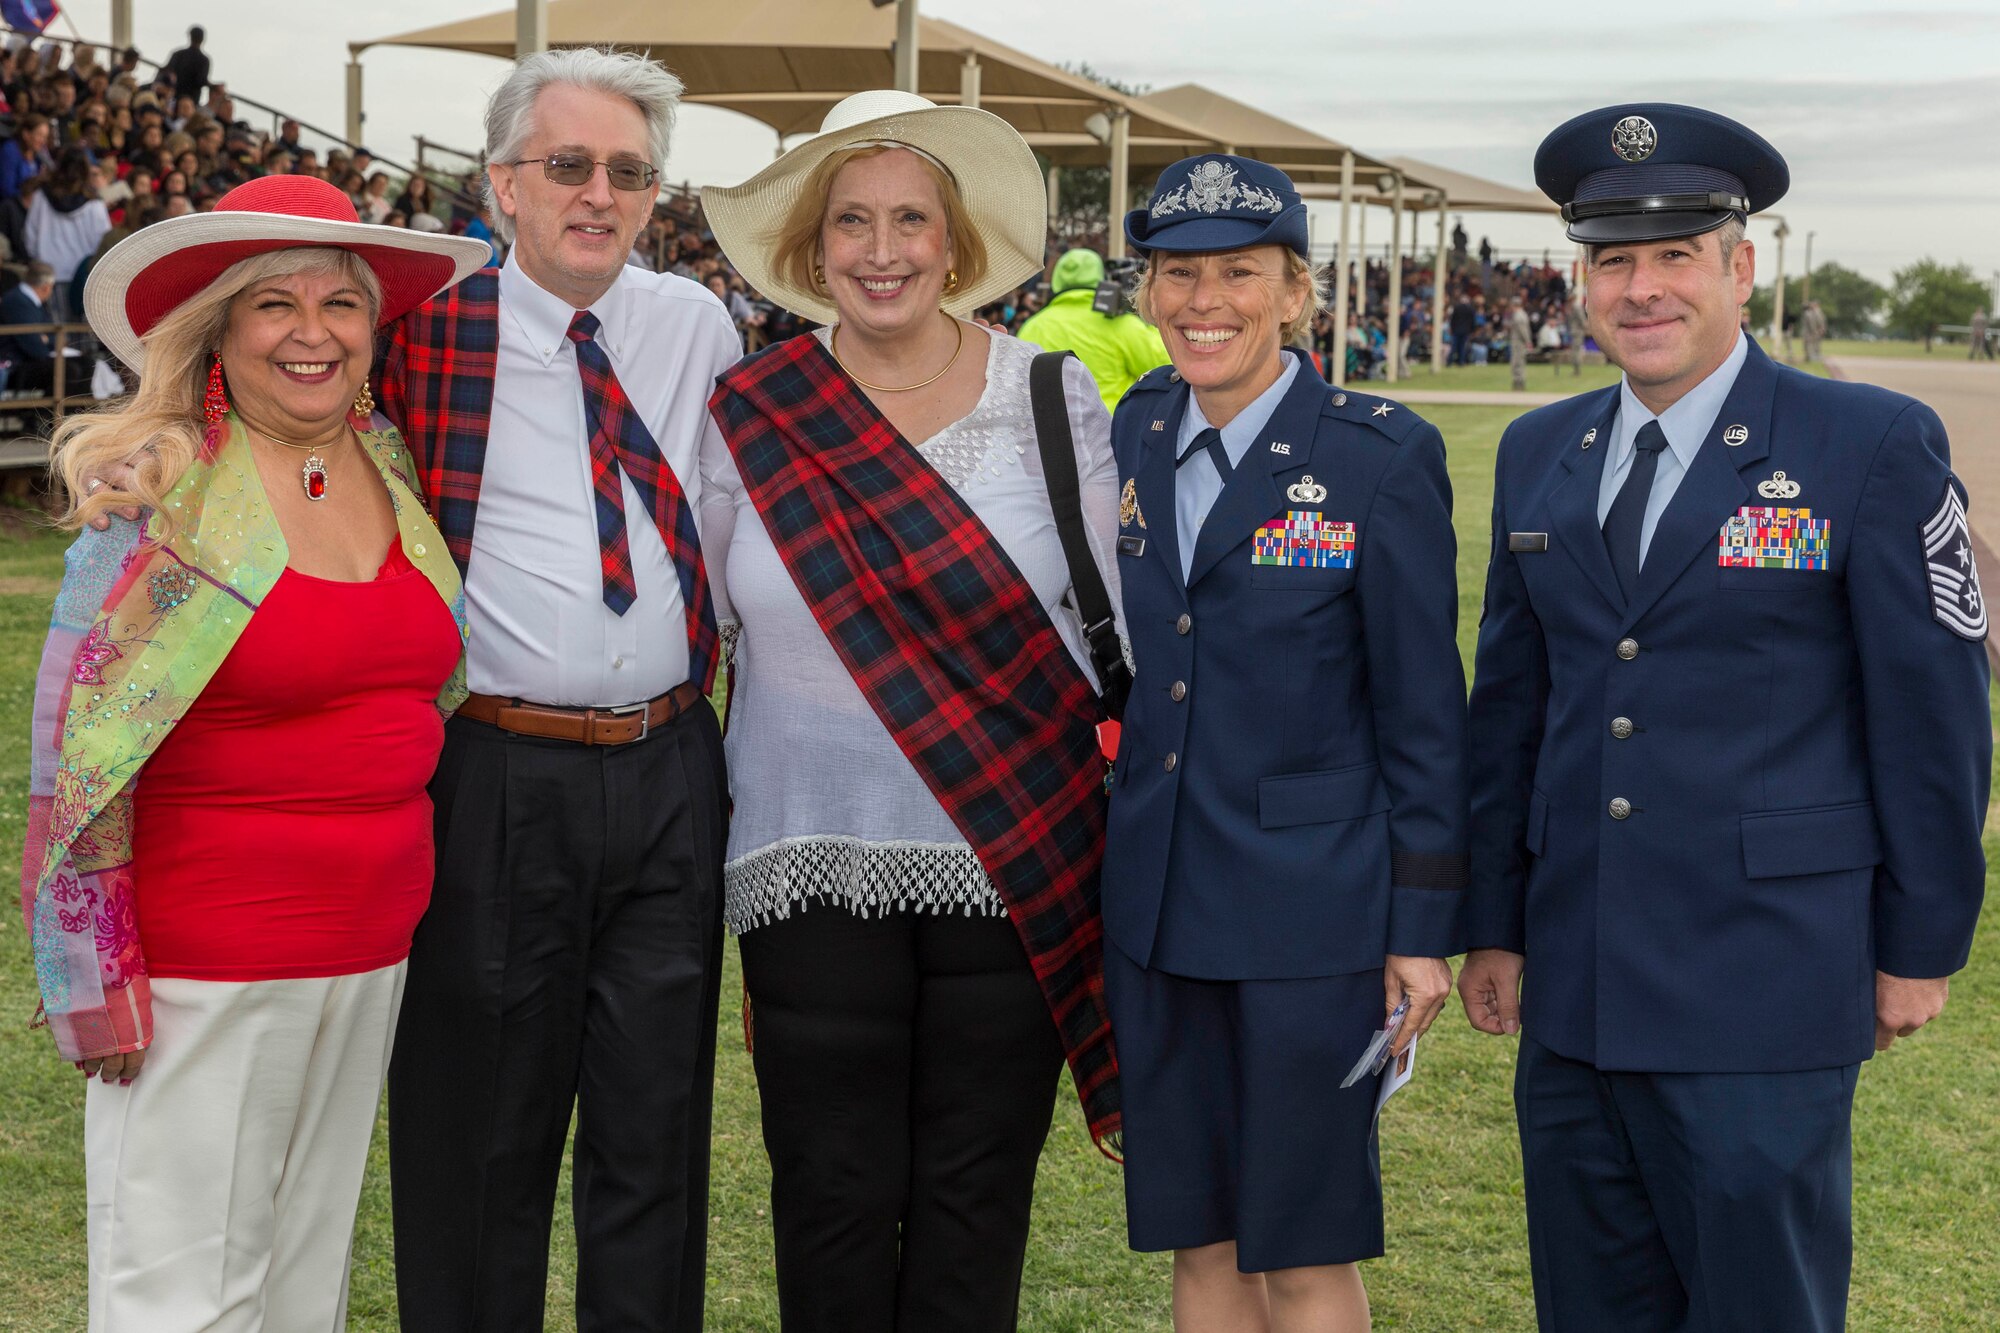 David Lackland (Inside Left) and his wife Eileen take a group photo at Joint Base San Antonio-Lackland, Texas after a basic military training graduation ceremony April 20, 2018. David is the cousin of Brig. Gen. Frank D. Lackland, the namesake of JBSA-Lackland. Today is the first time David and Eileen have viewed a BMT graduation. (U.S. Air Force photo by Ismael Ortega / Released)